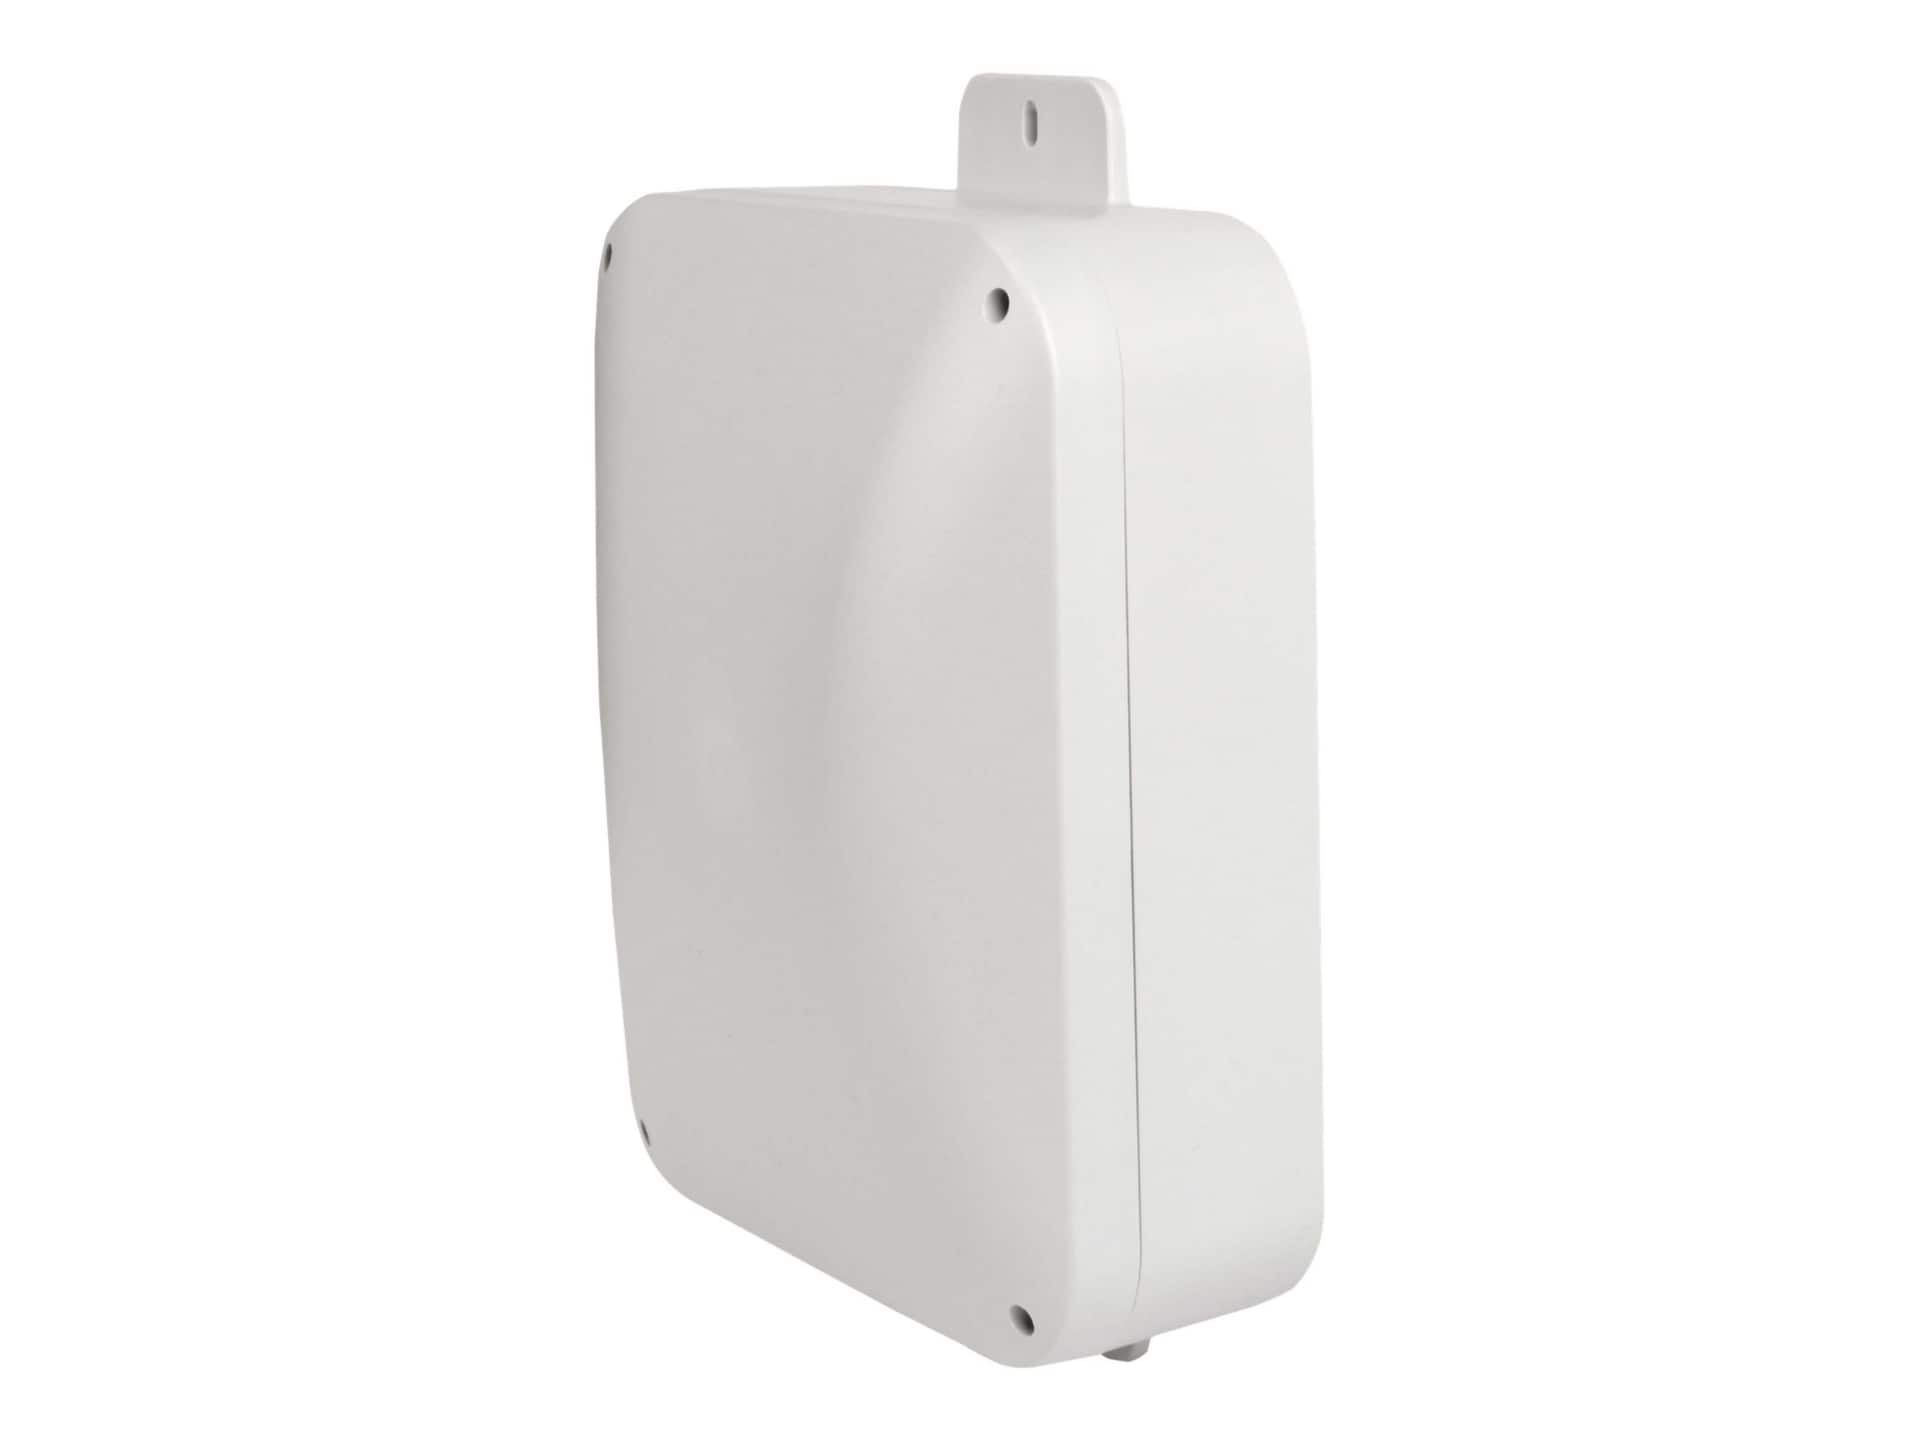 Tripp Lite Wireless Access Point Enclosure Wifi 4 Surface Mount 13 x 9in